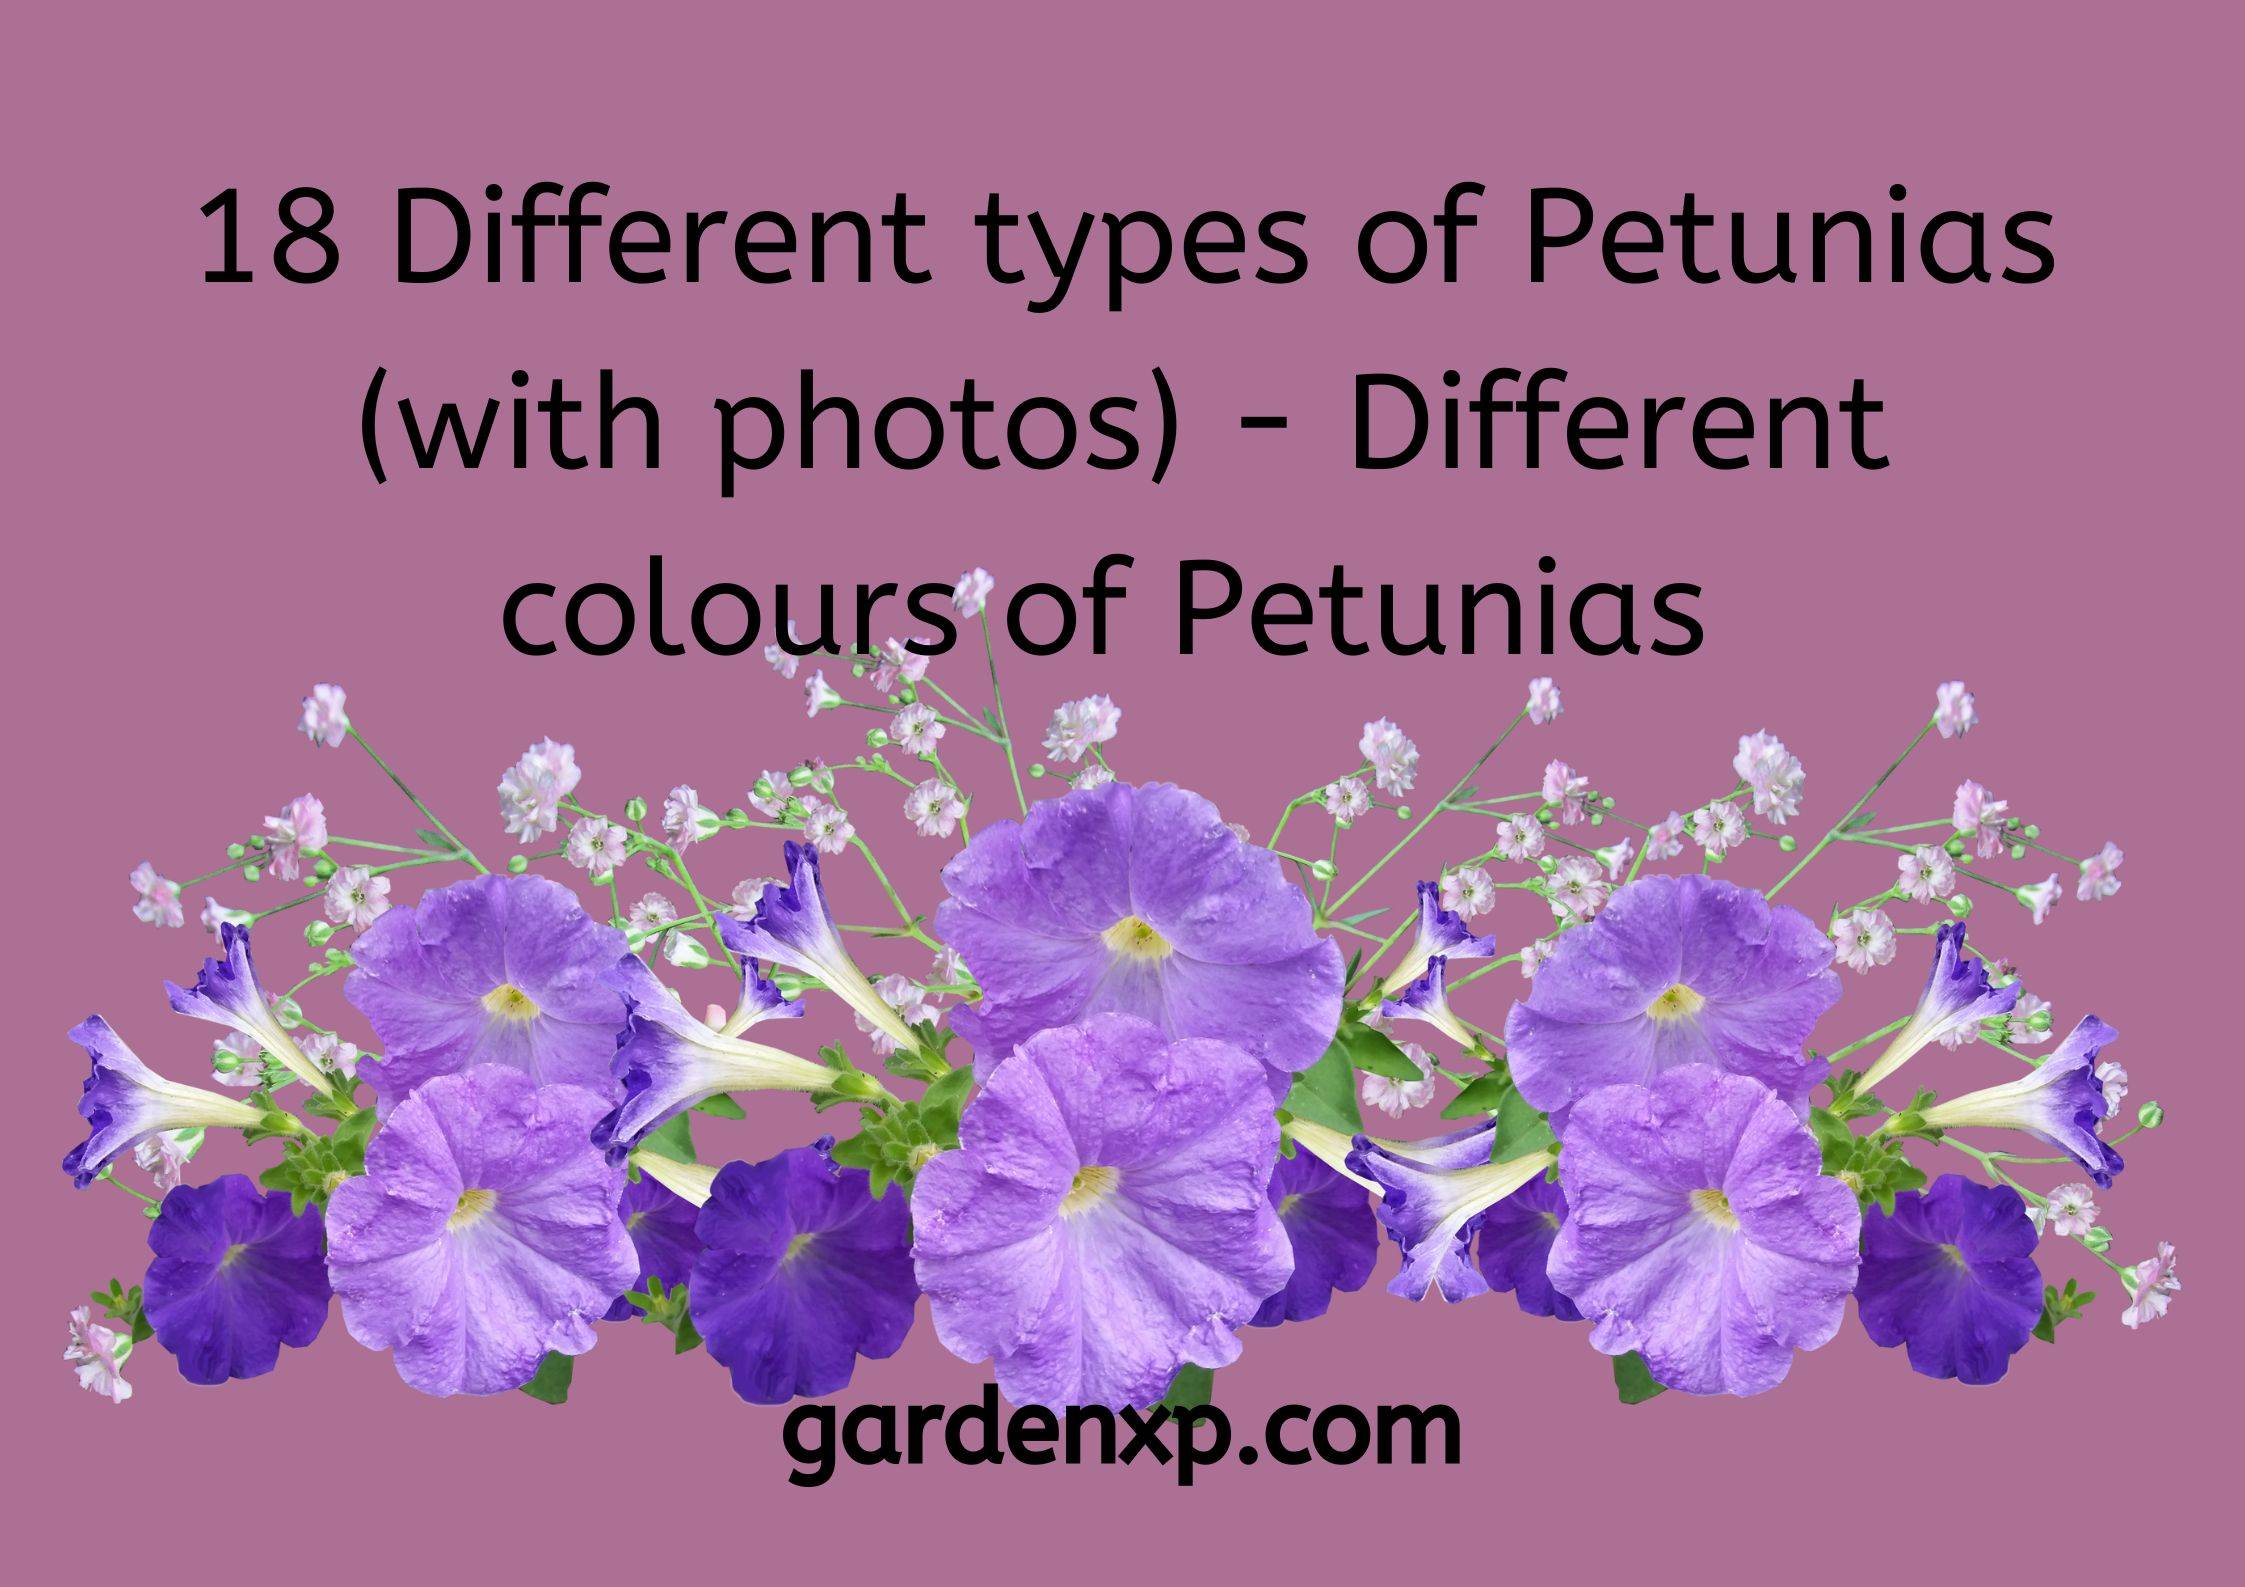 18 Different types of Petunias (with photos) - Different colours of Petunias 